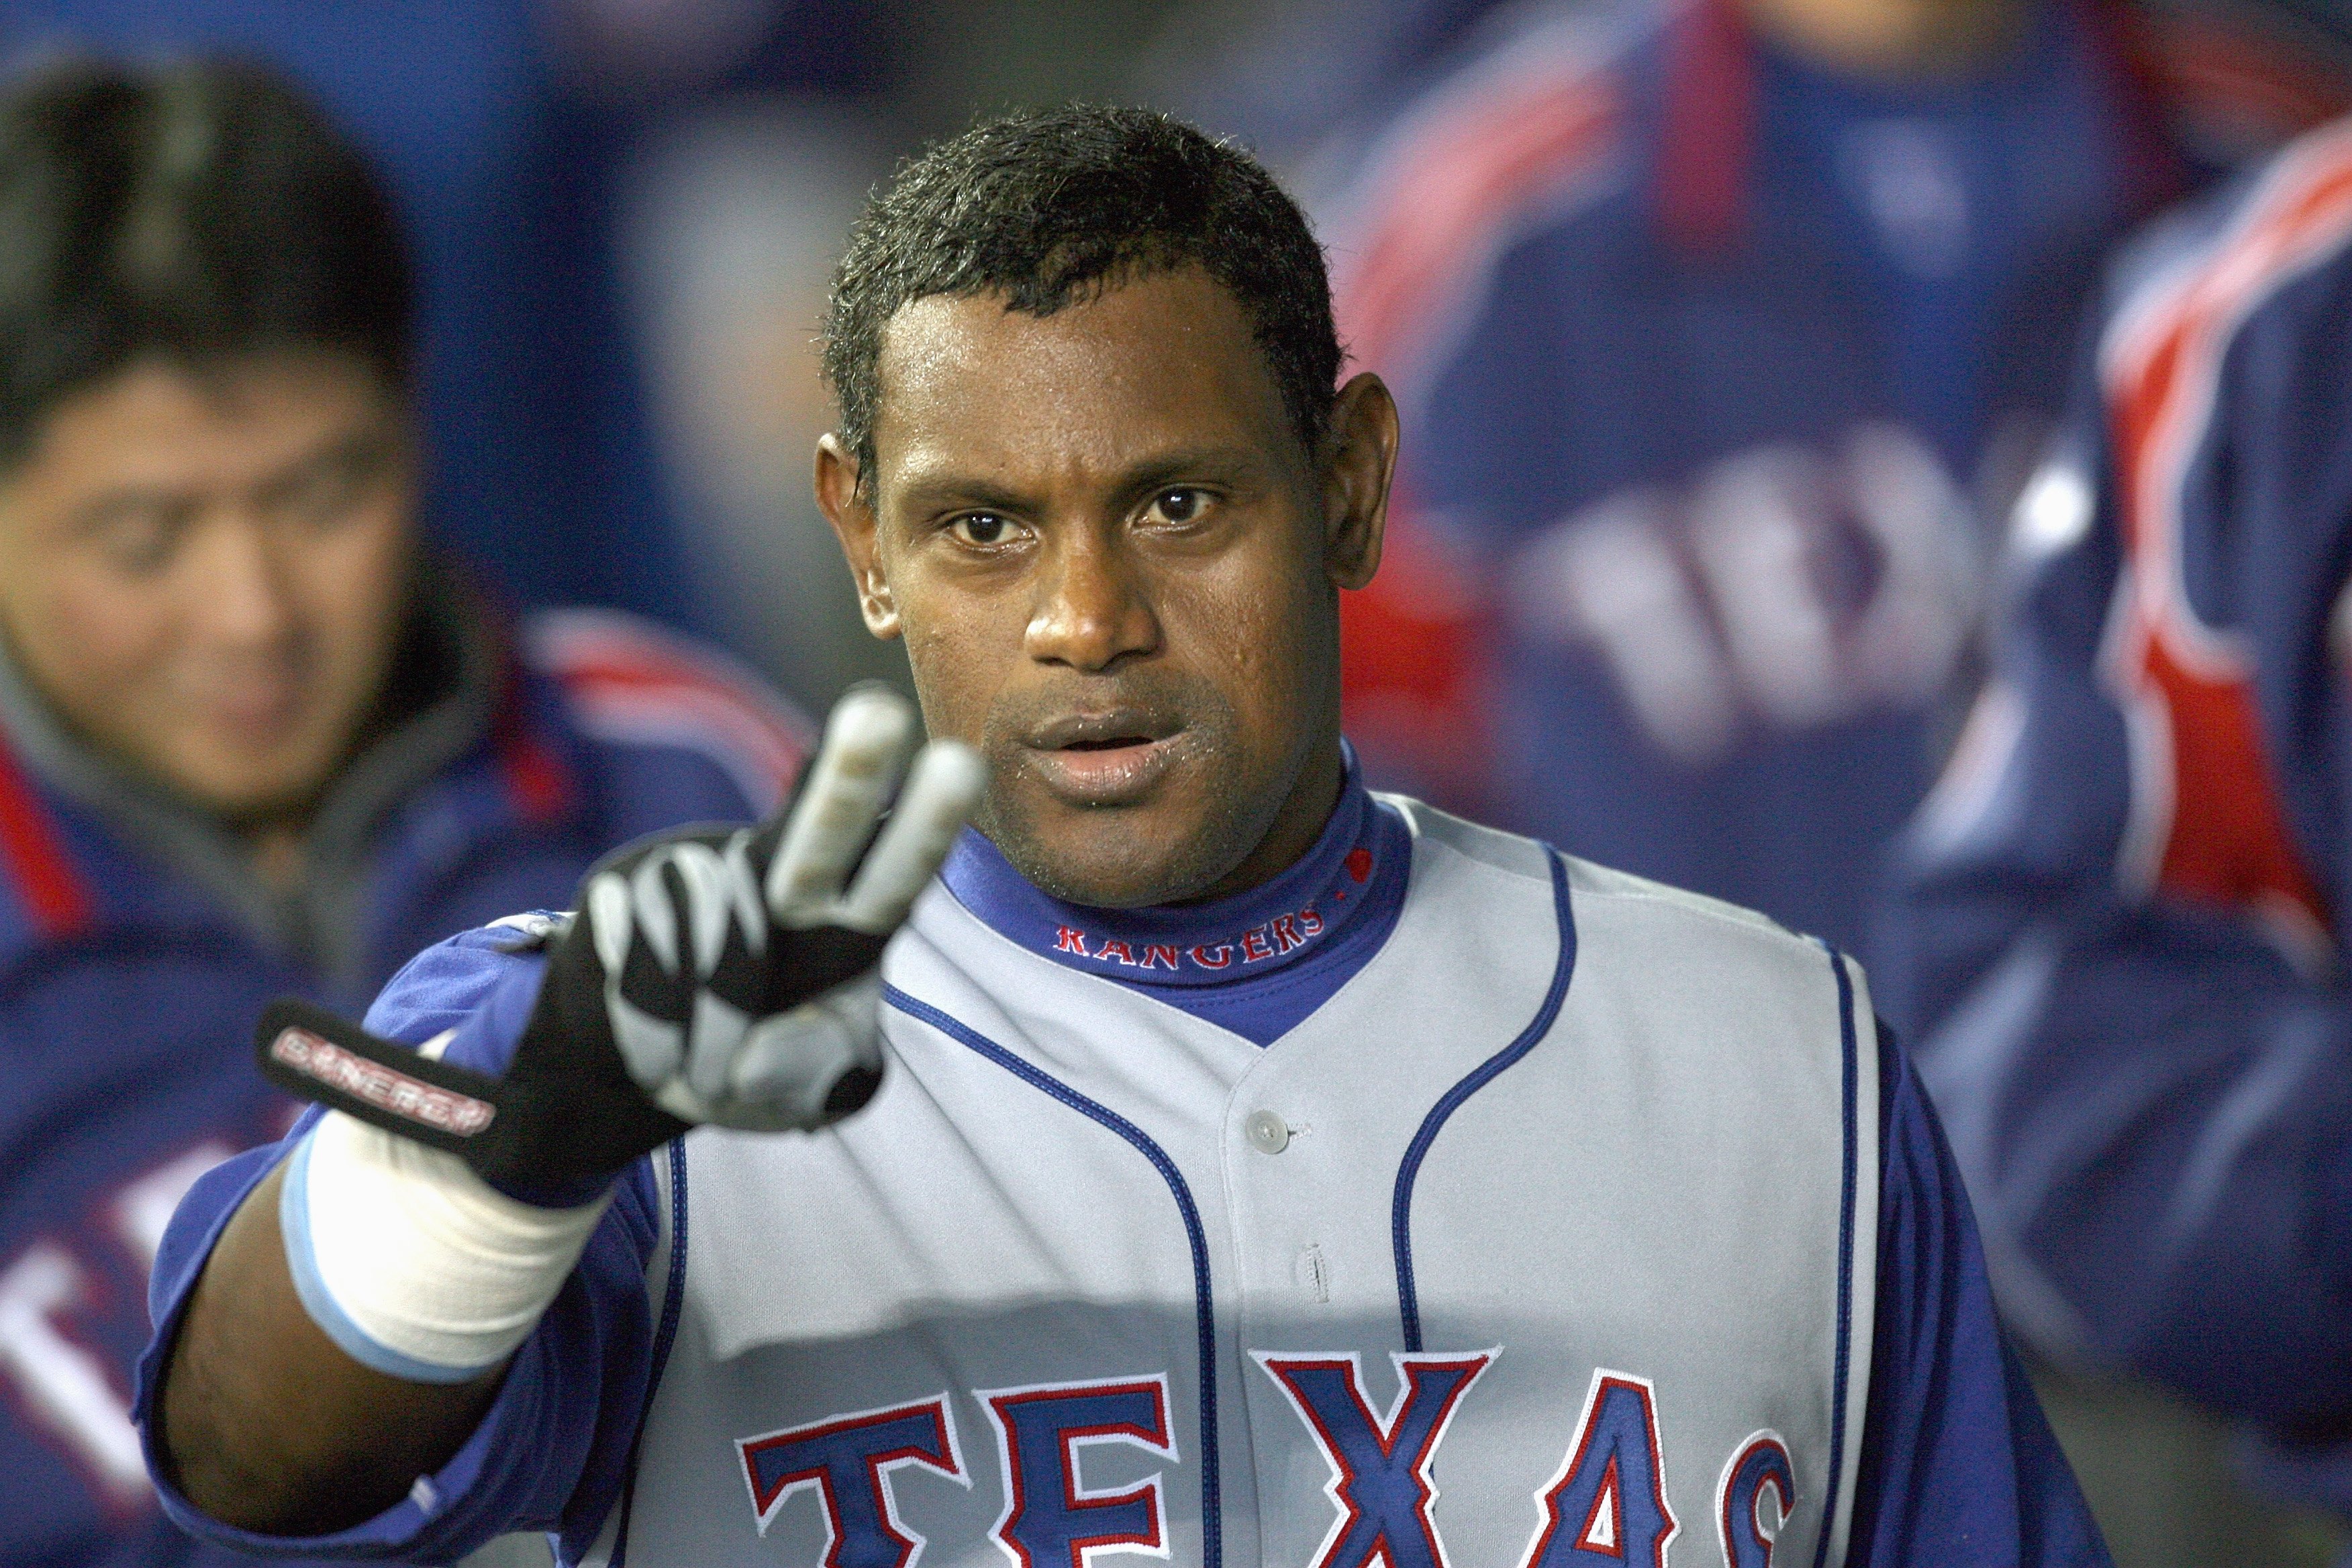 SEATTLE - APRIL 14: Sammy Sosa #21 of the Texas Rangers celebrates after hitting a two run homer against the Seattle Mariners on April 14, 2007 at Safeco Field in Seattle, Washington. (Photo by Otto Greule Jr/Getty Images)